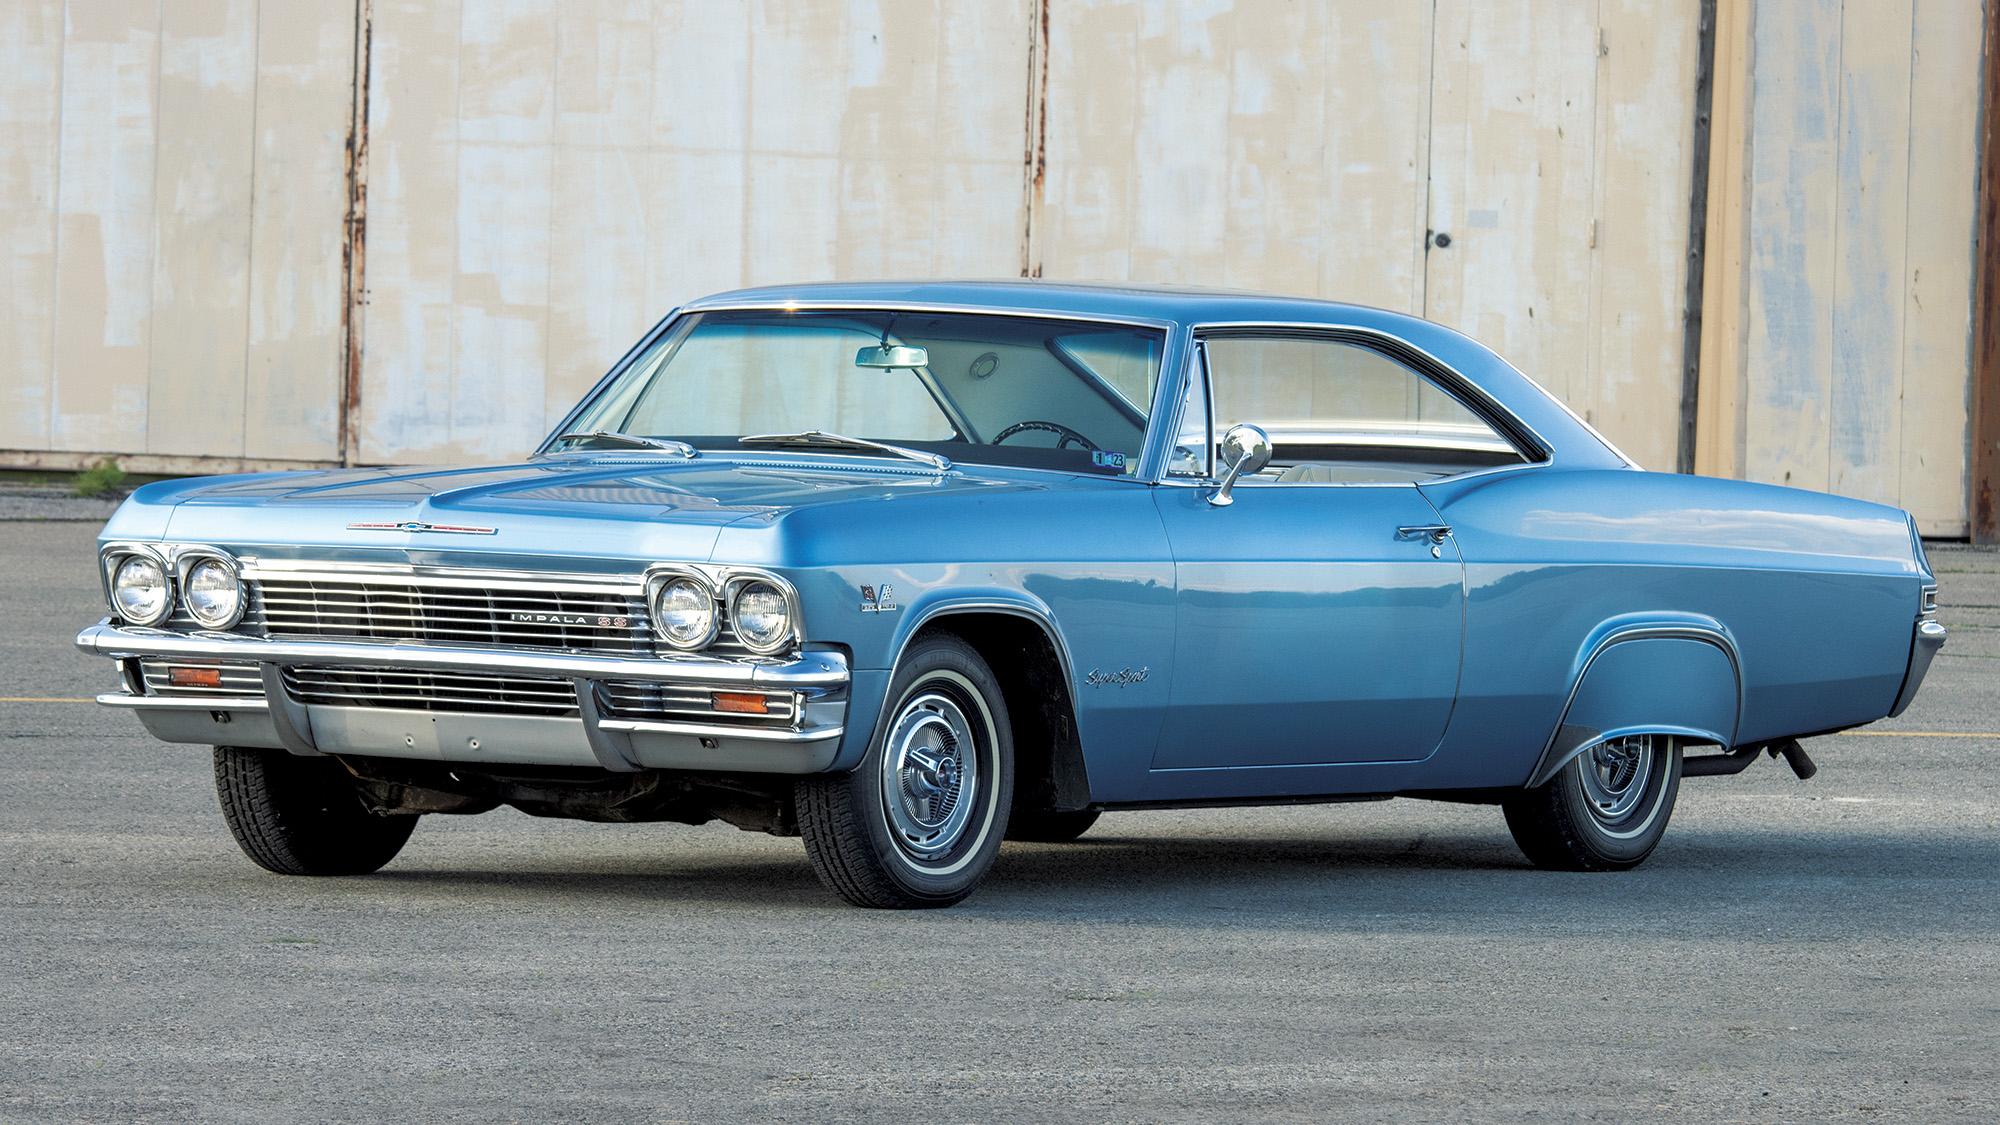 He didn't get the 396 he wanted, but he still kept his 1965 Chevrolet Impala SS since it was new